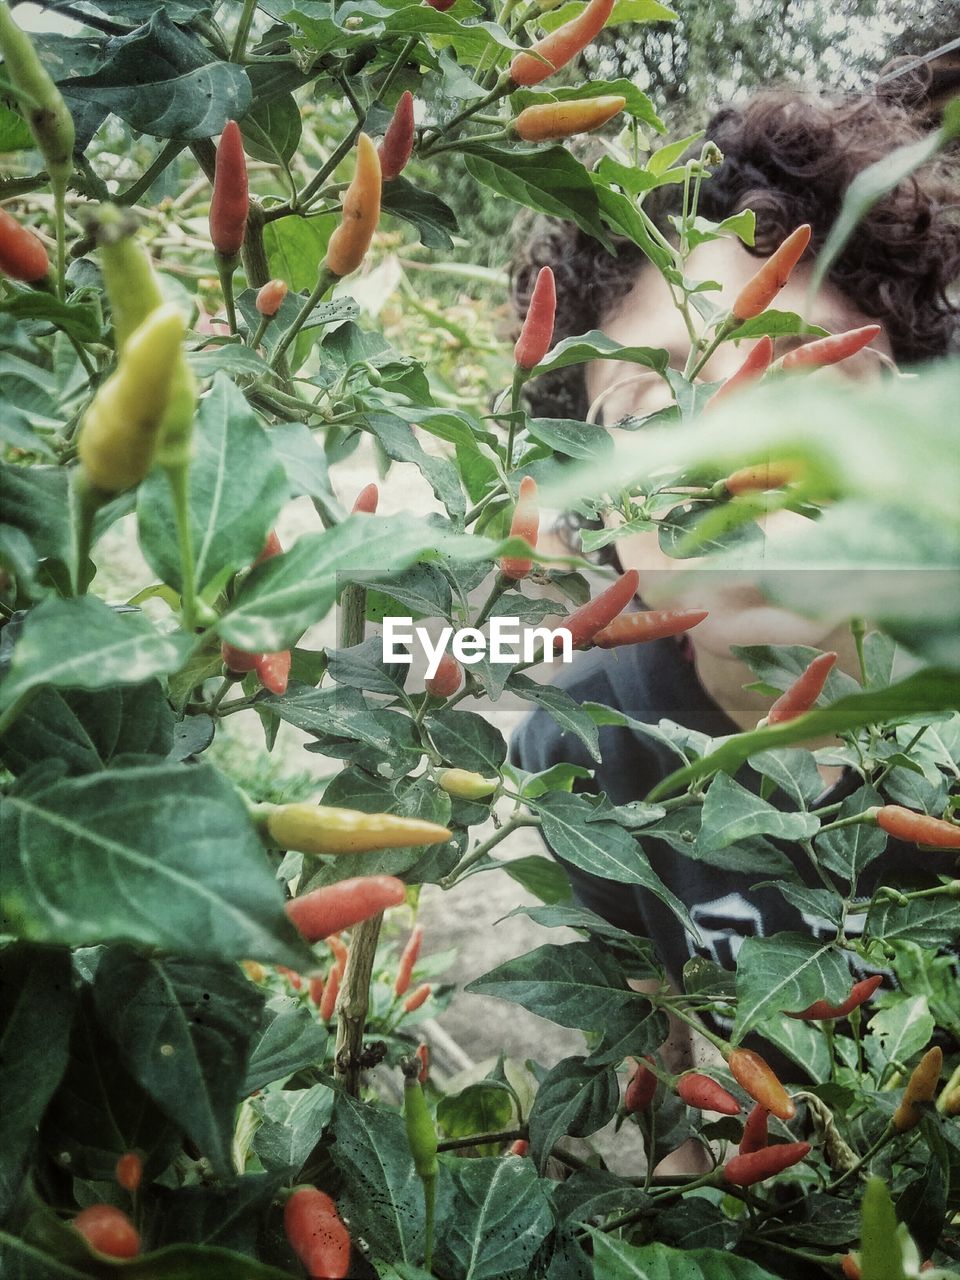 Chili plants against man in background